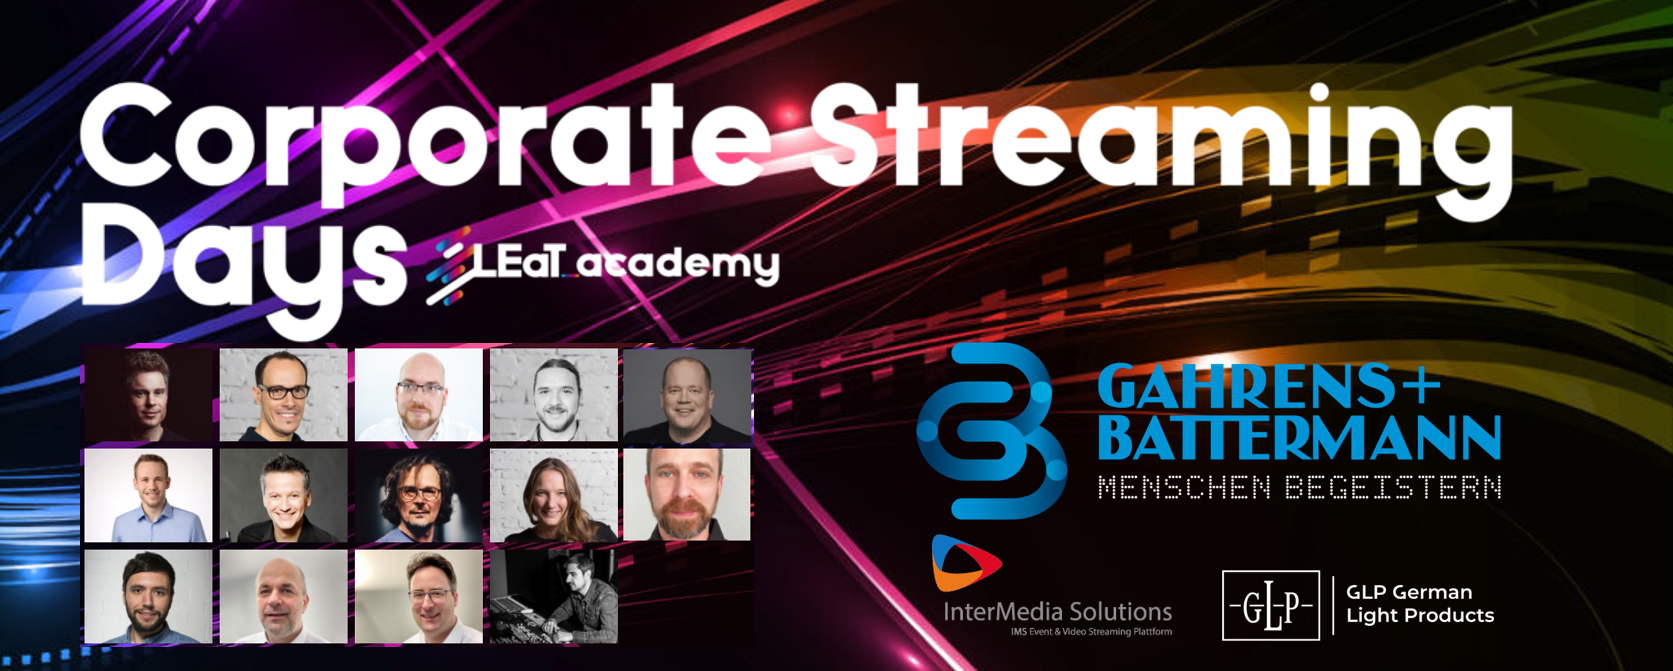 Corporate Streaming Days LEaT academy